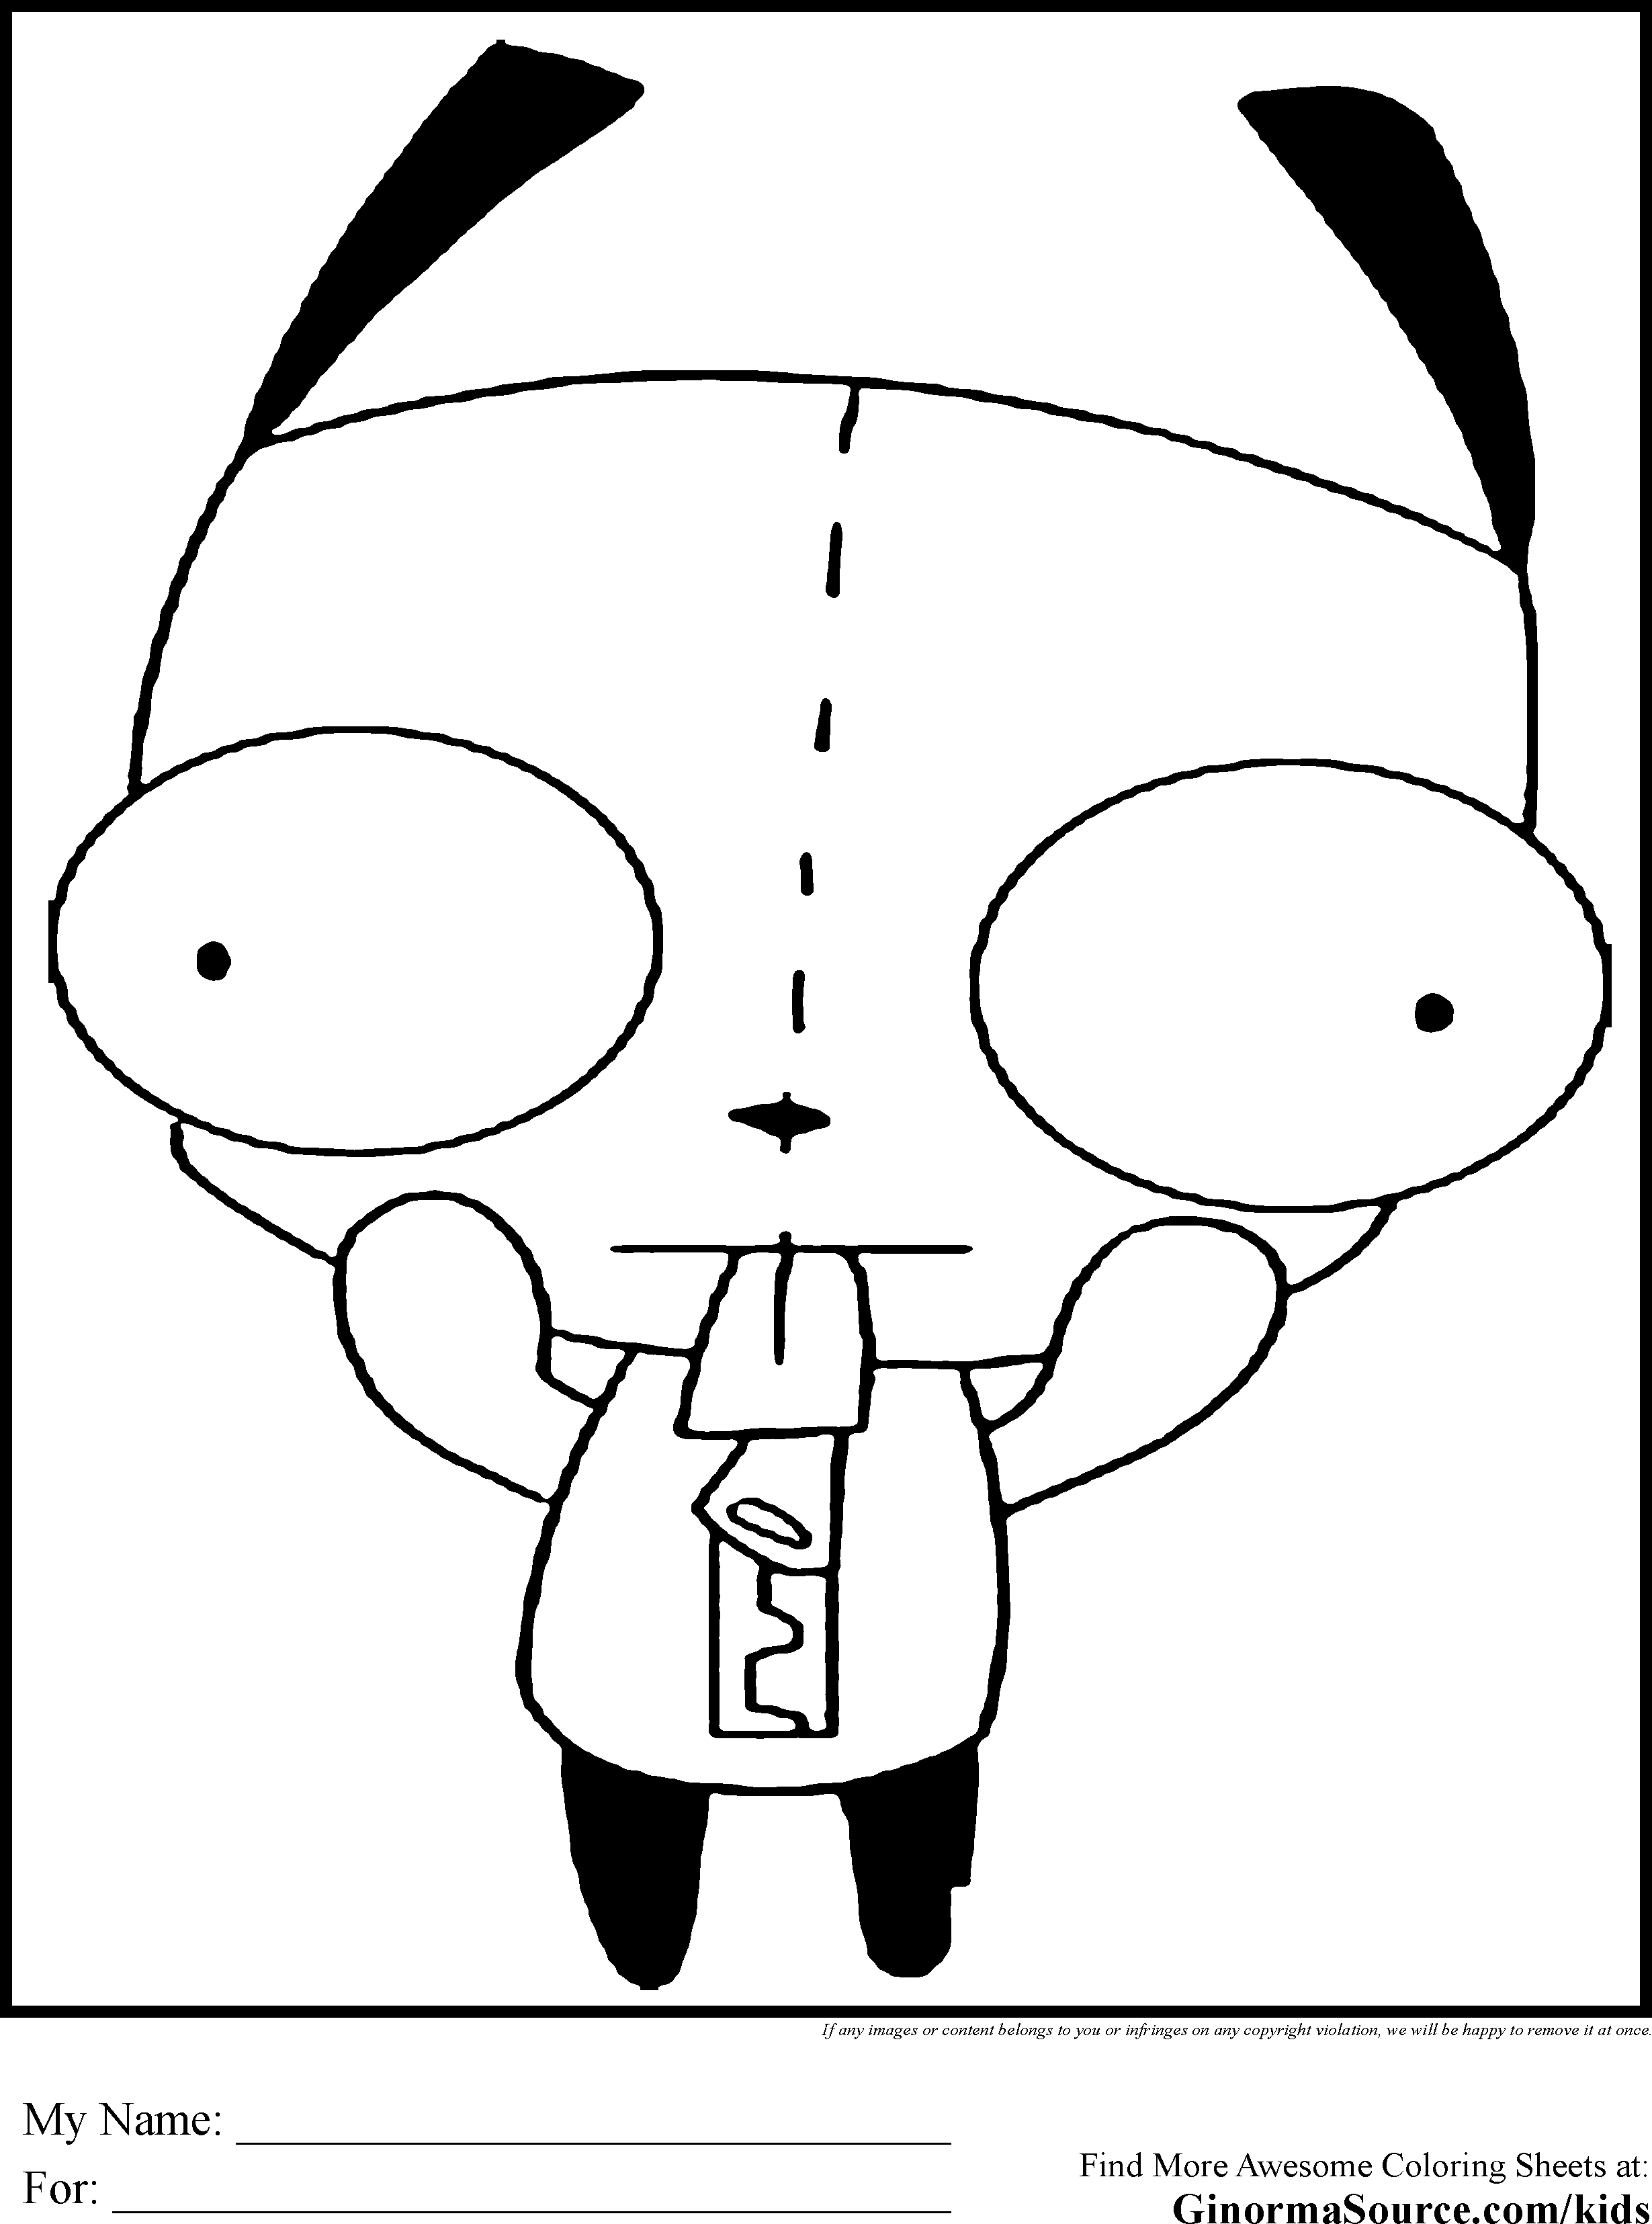 Invader Zim Gir Coloring Pages To Print - Coloring Home